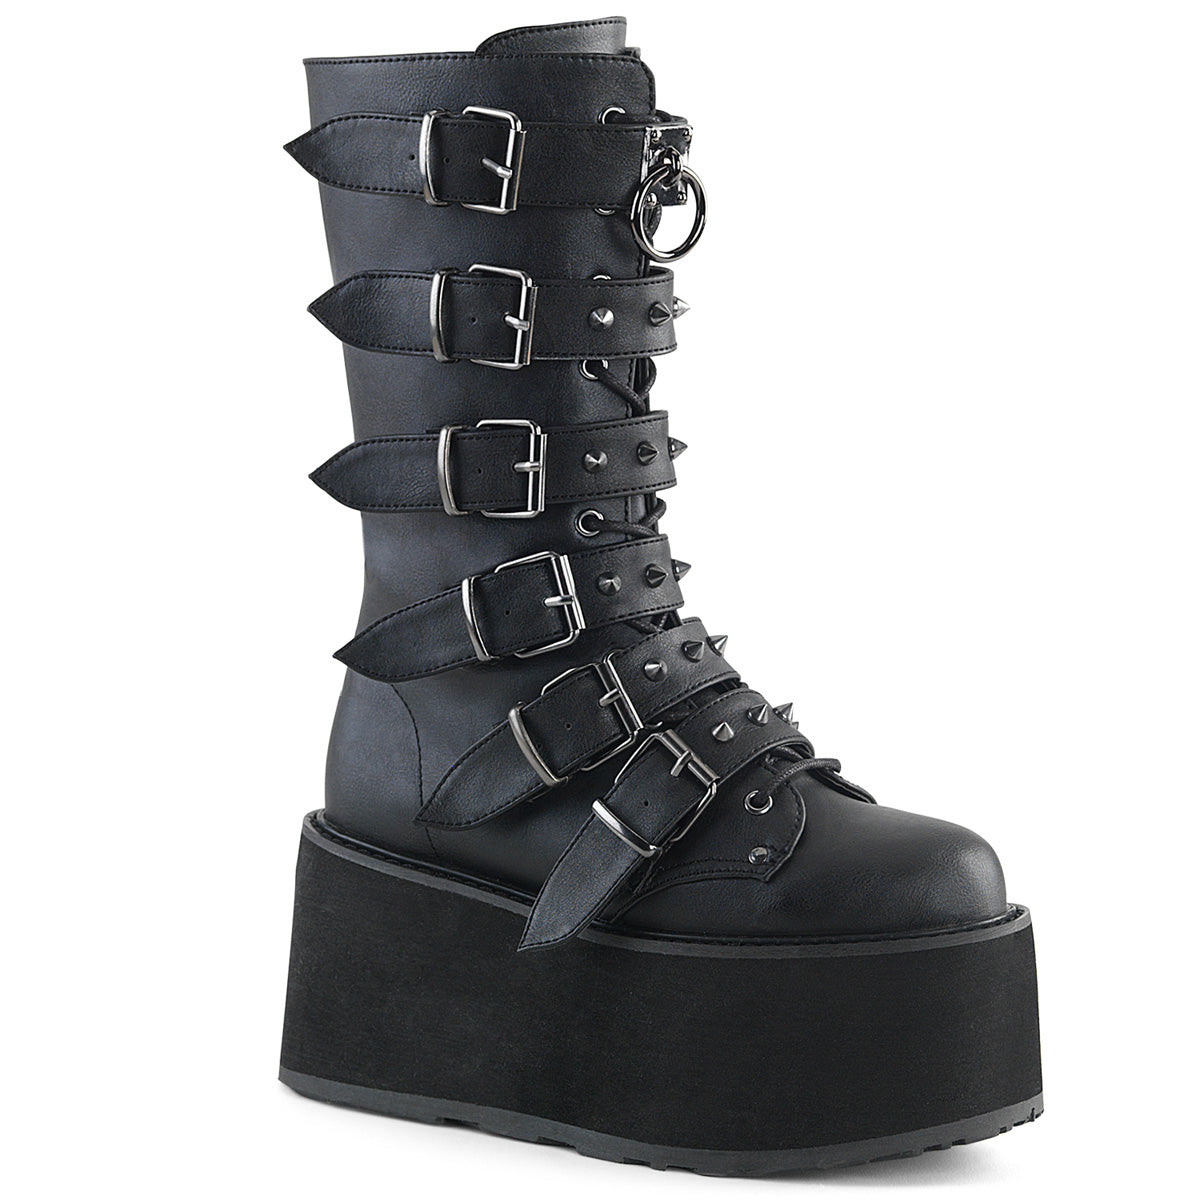 DemoniaCult Womens Boots DAMNED-225 Blk Vegan Leather